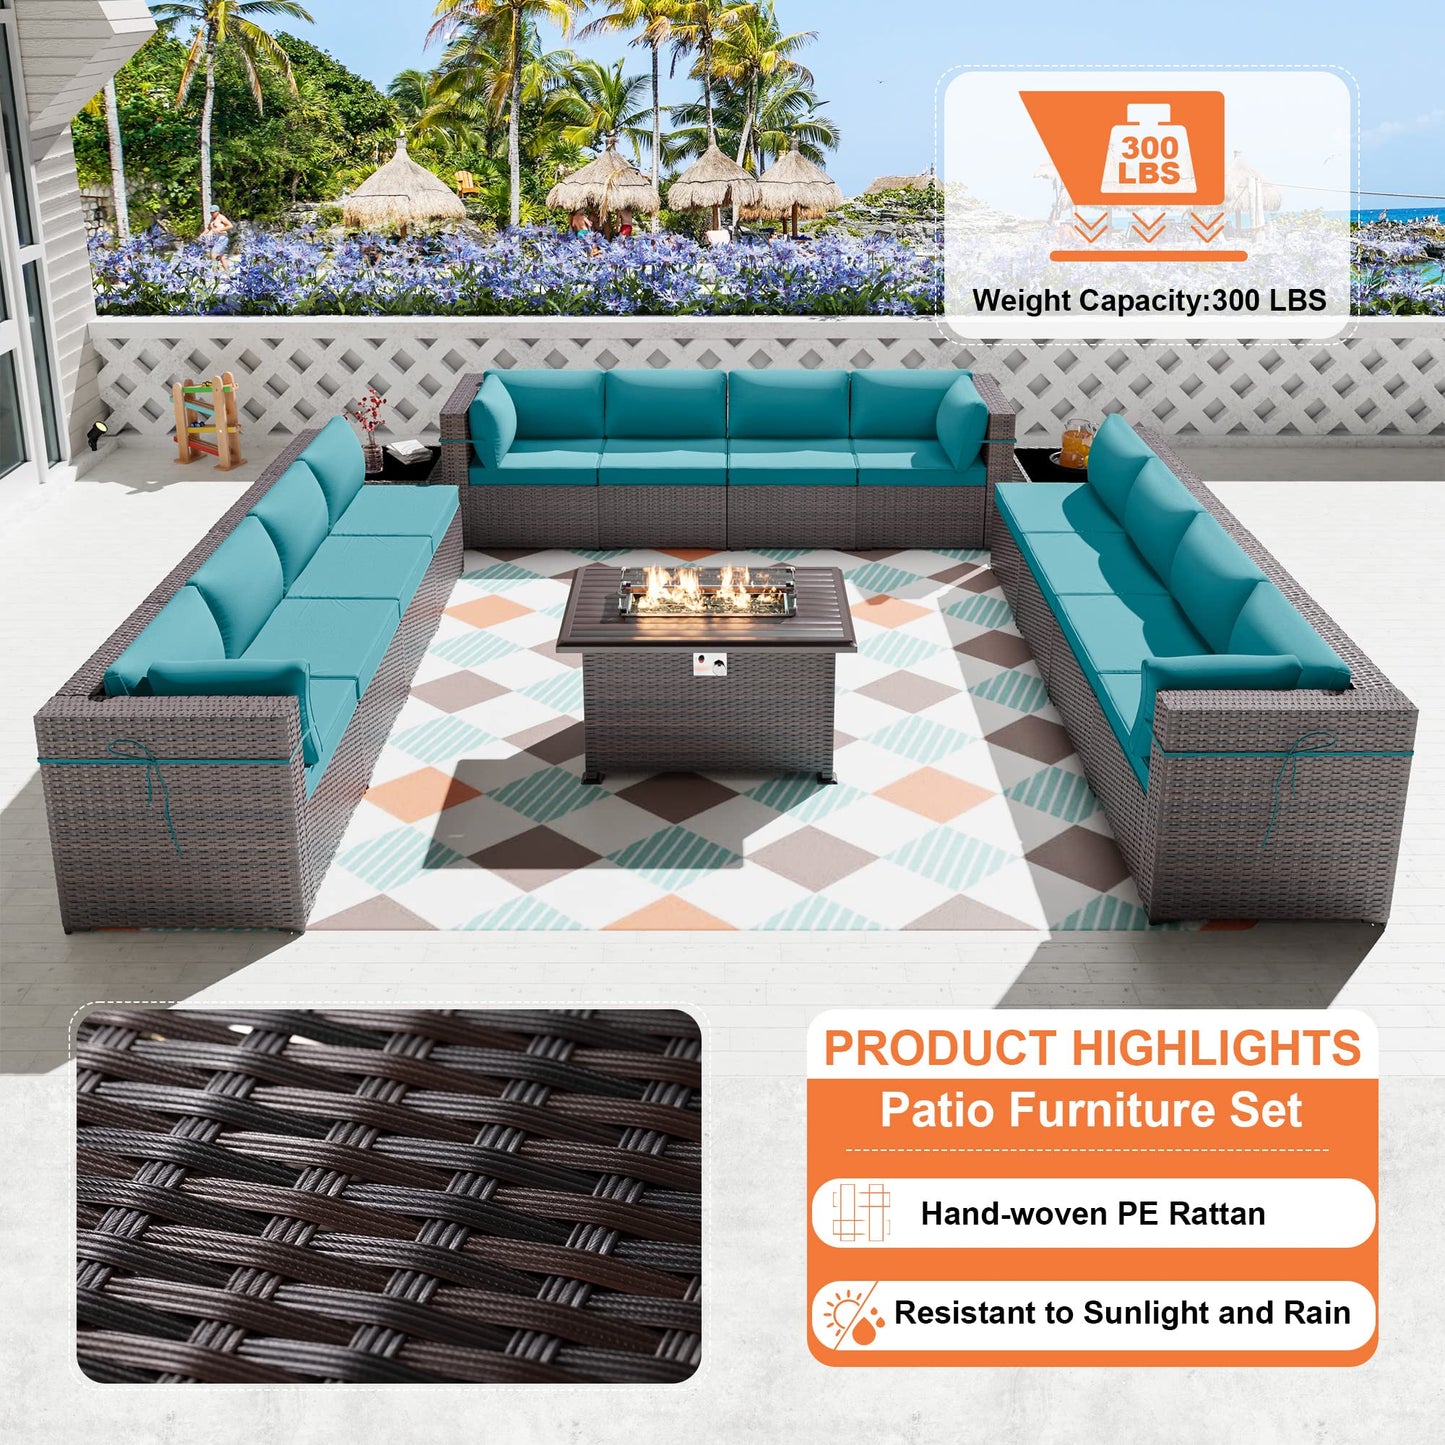 ALAULM 15 Pieces Outdoor Patio Furniture Set with Propane Fire Pit Table Outdoor Sectional Sofa Sets Patio Furniture